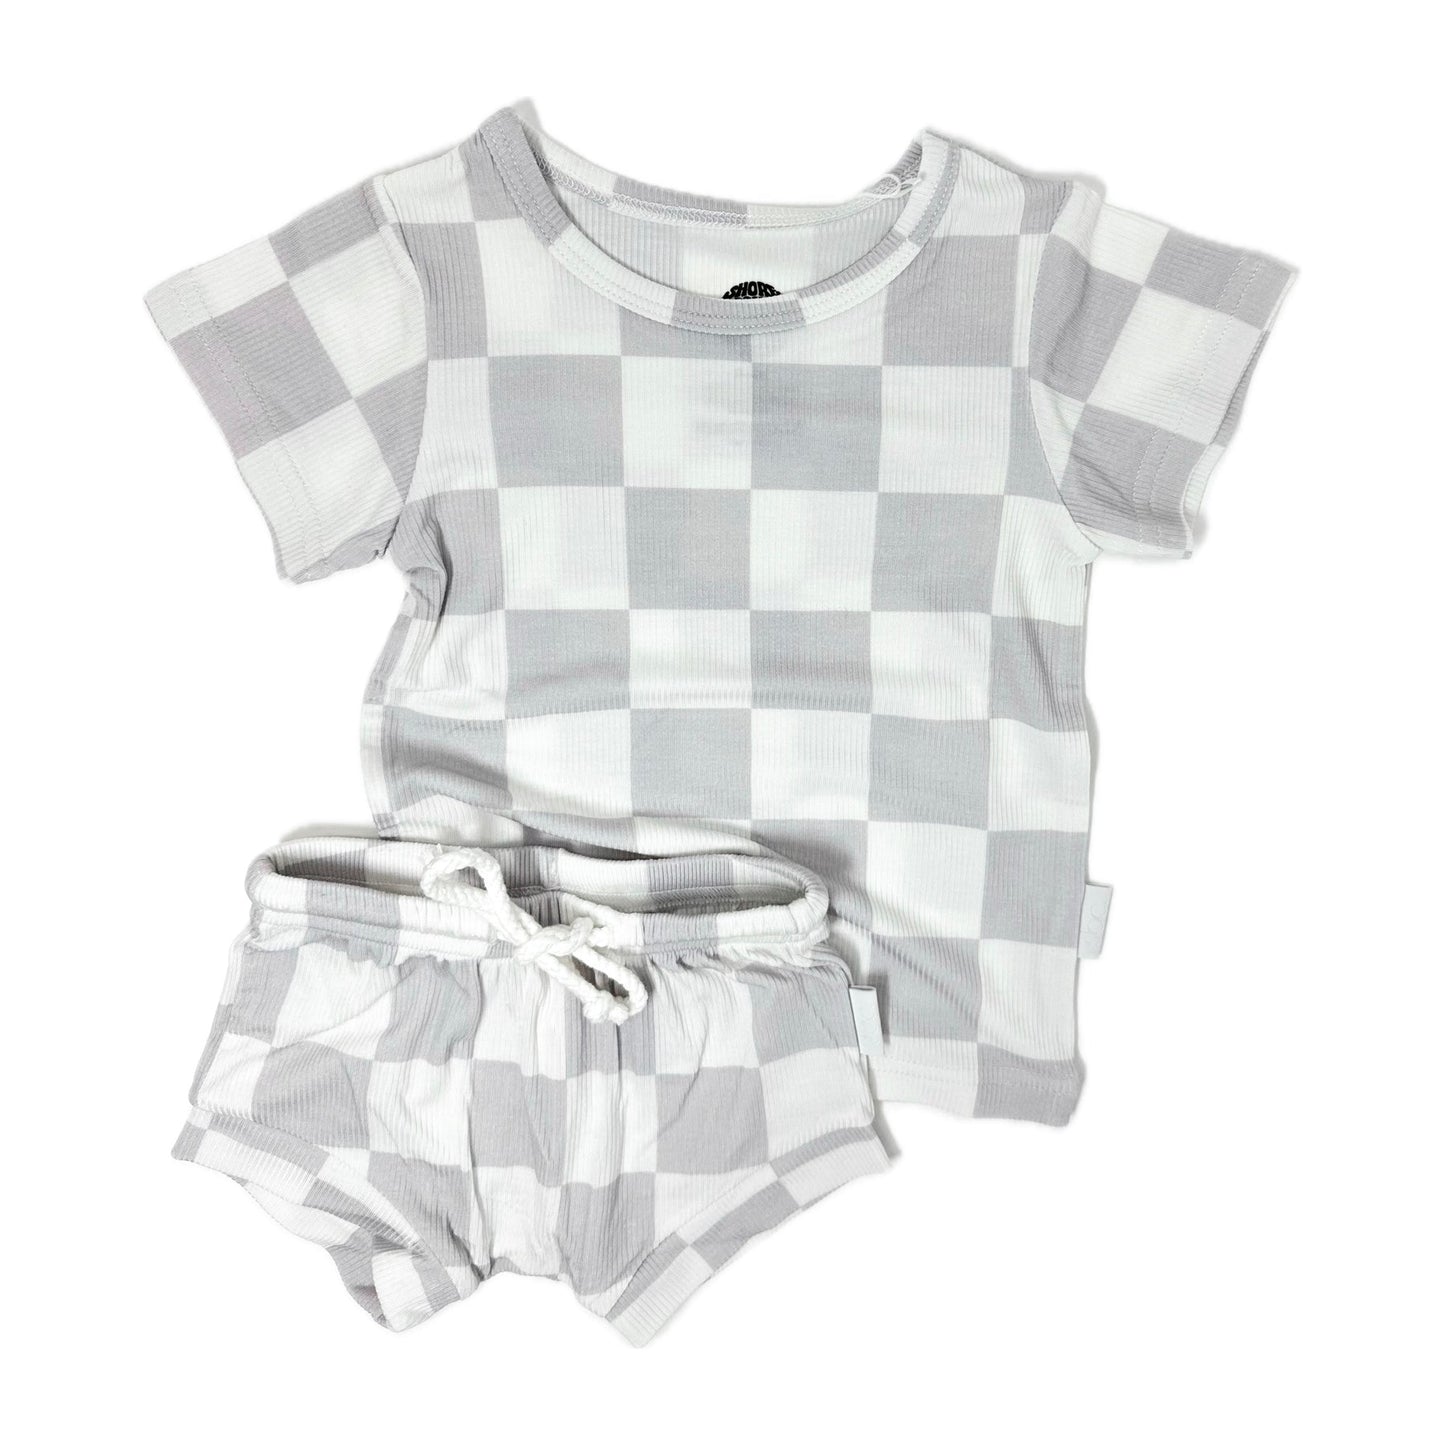 Photo of a toddler's grey and white checkered shirt and shorties set. This unisex outfit is crafted from soft, ribbed bamboo fabric, ensuring comfort and breathability. Ideal for baby boys and girls, the sizes range from 3-6 months, 6-12 months, 12-18 months, to 18-24 months. Perfect for a stylish and eco-friendly wardrobe choice for your little one.